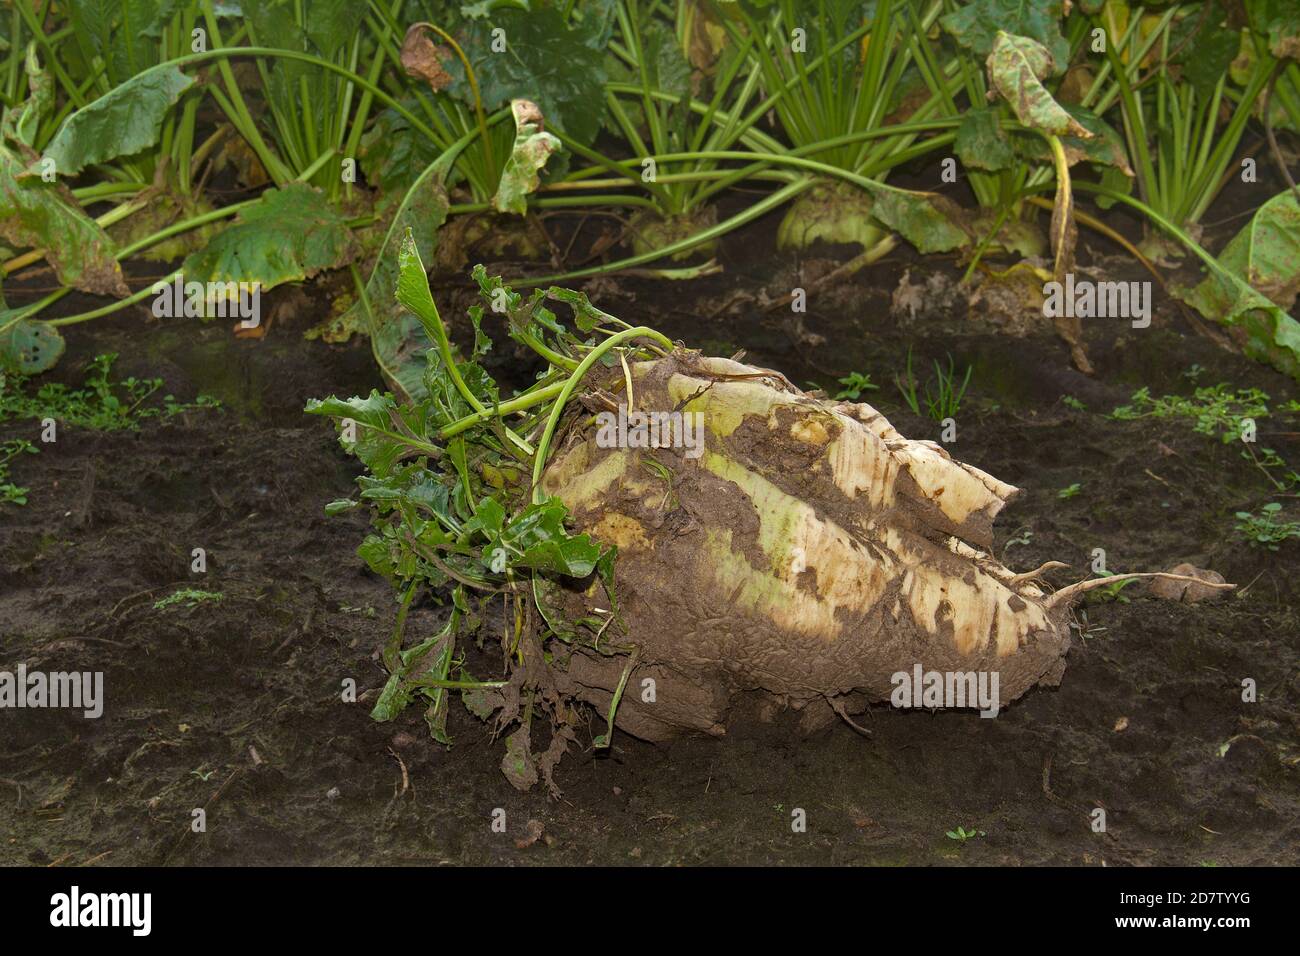 Harvested sugar beet, lying in the field Stock Photo